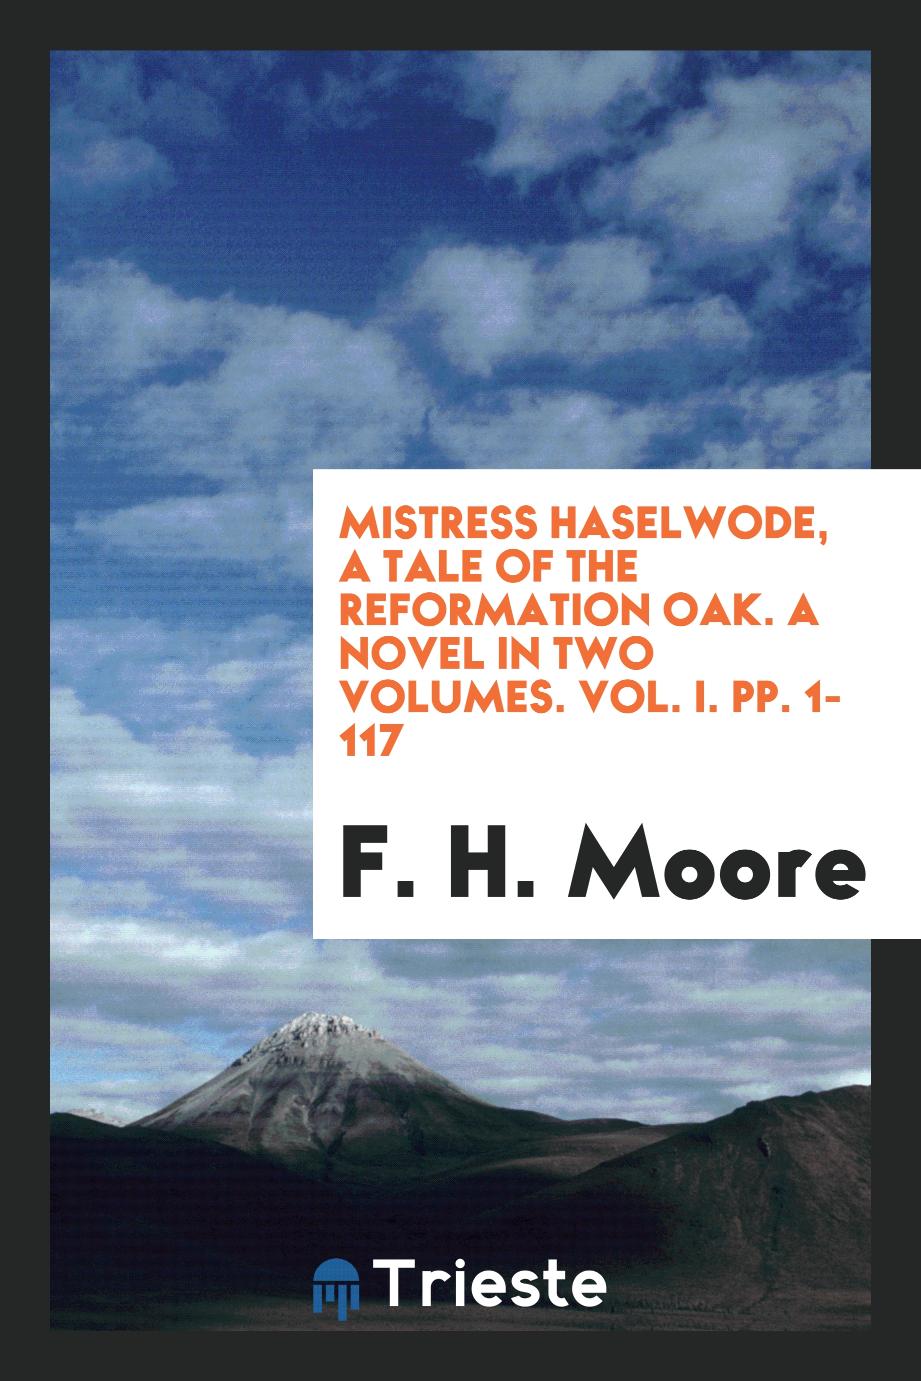 Mistress Haselwode, a Tale of the Reformation Oak. A Novel in Two Volumes. Vol. I. pp. 1-117